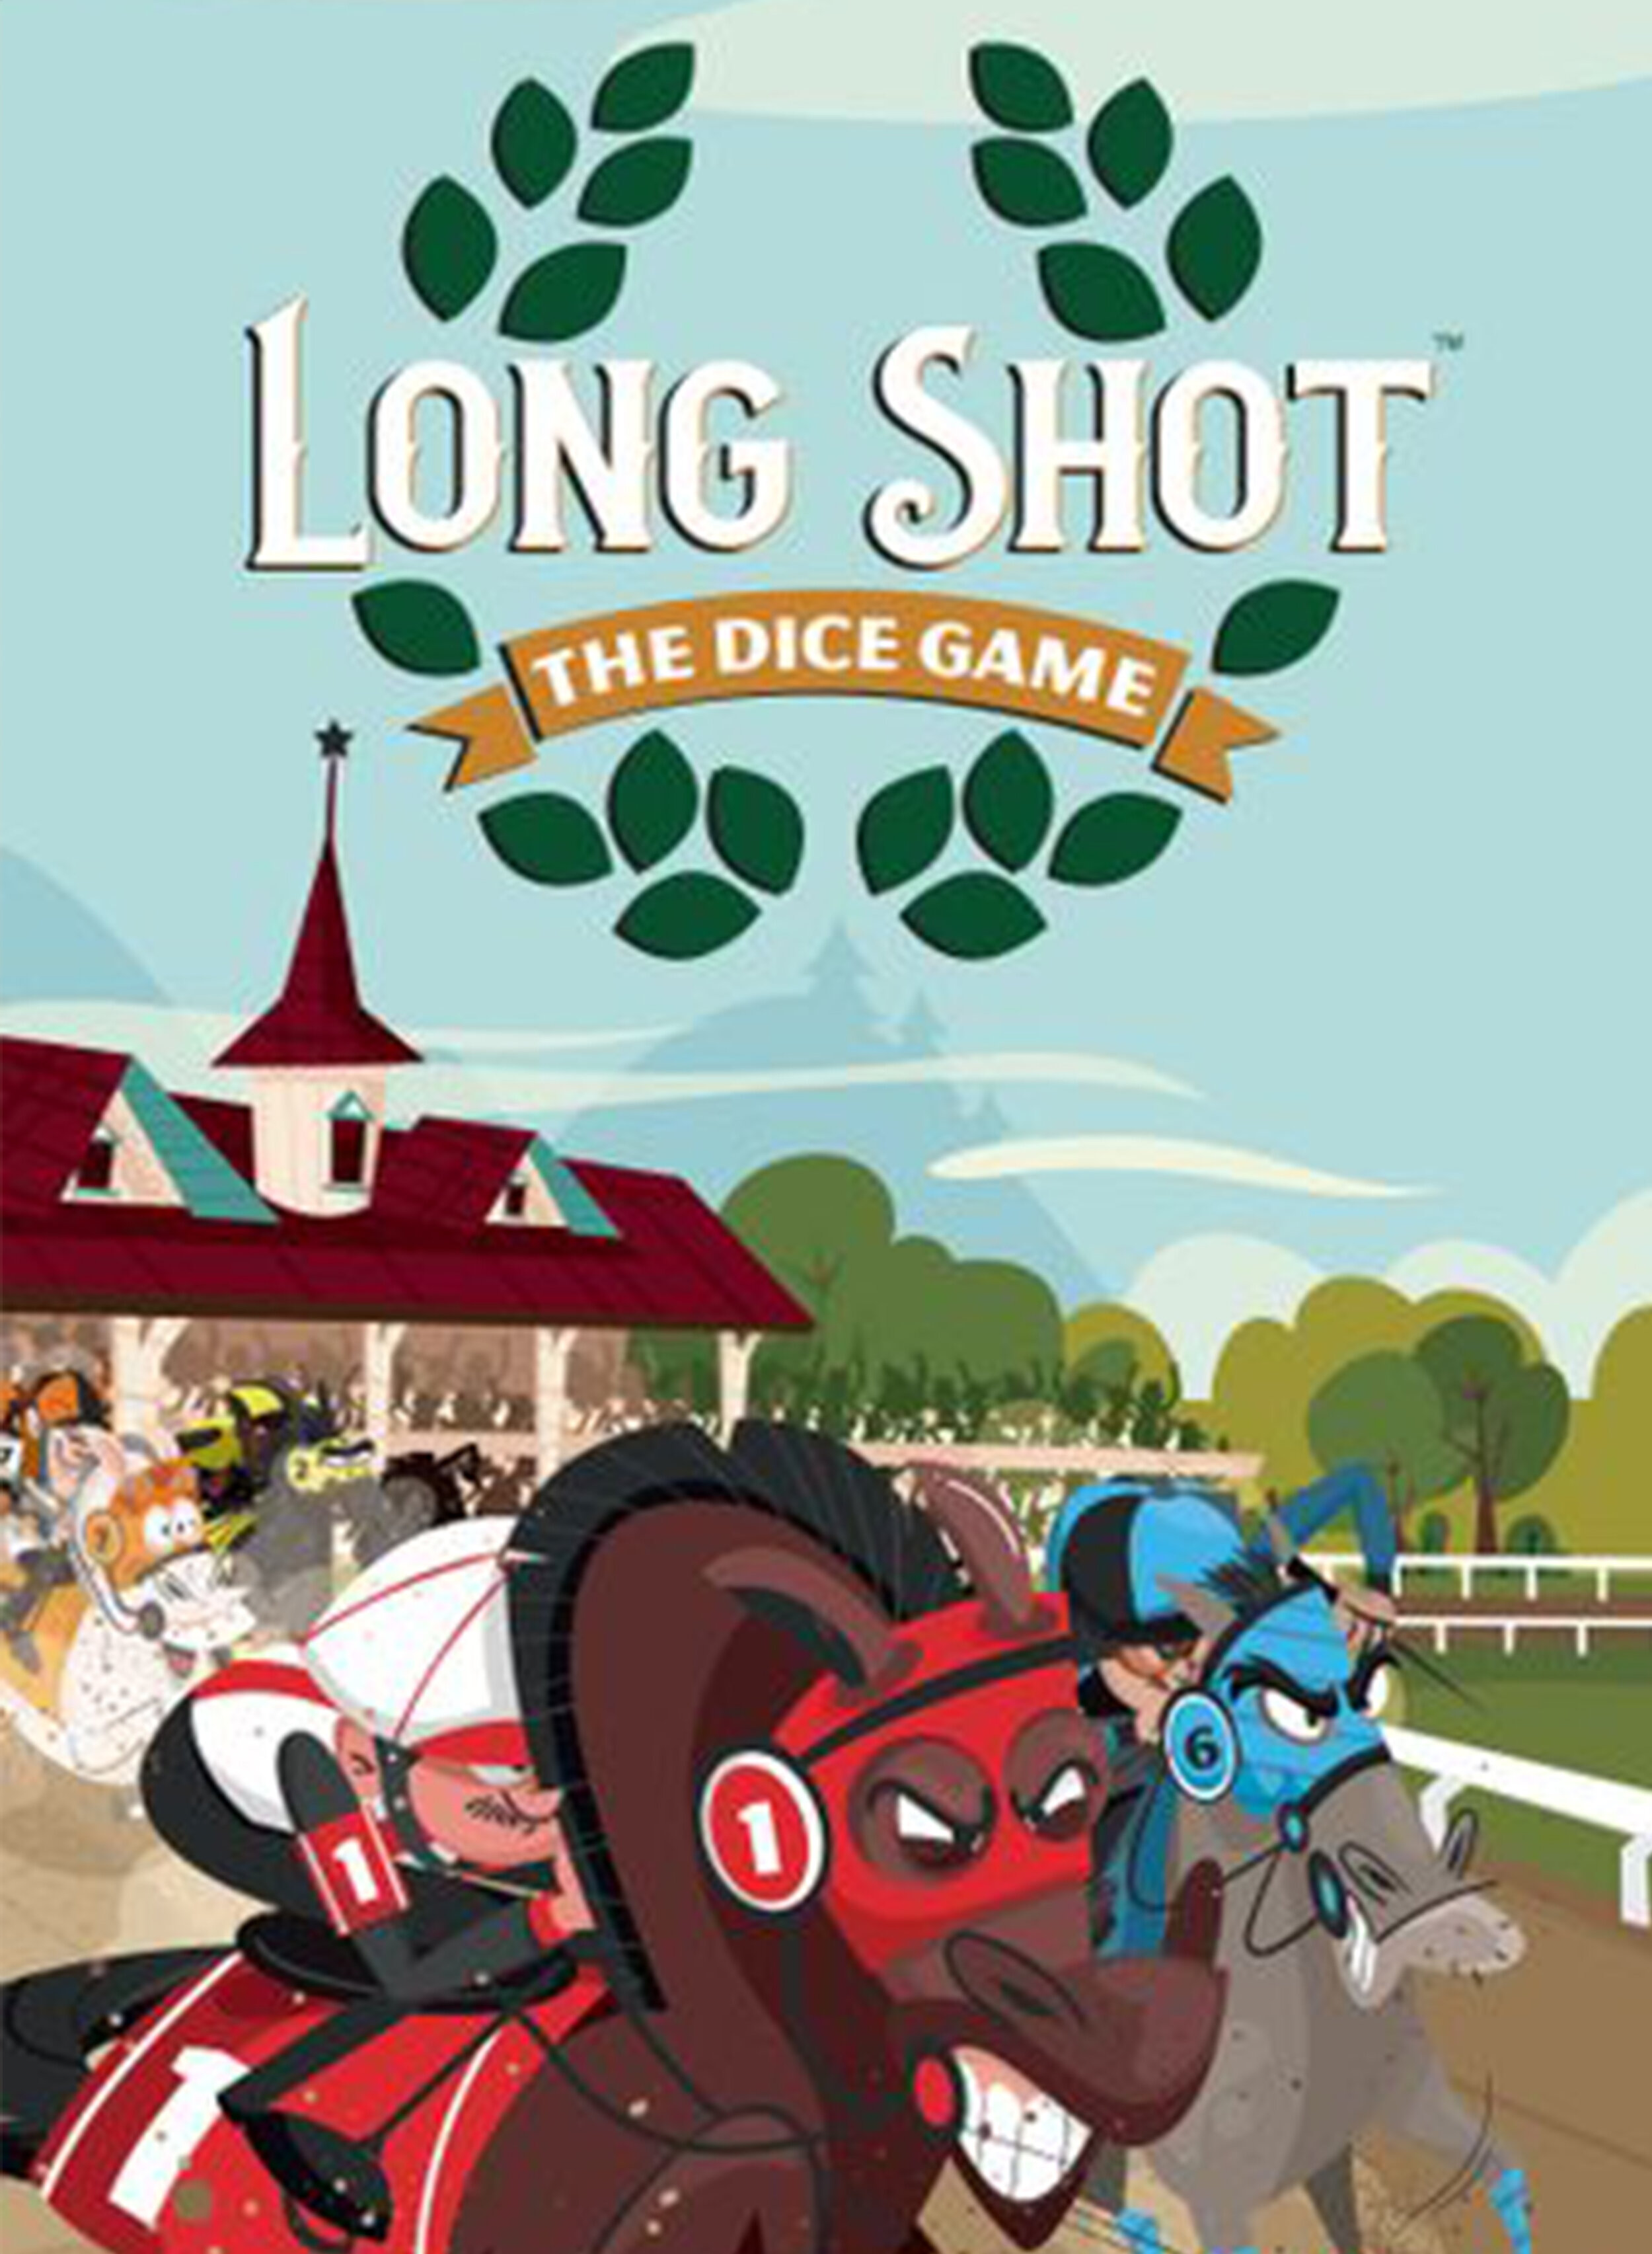 Long Shot The Dice Game Cover.jpg